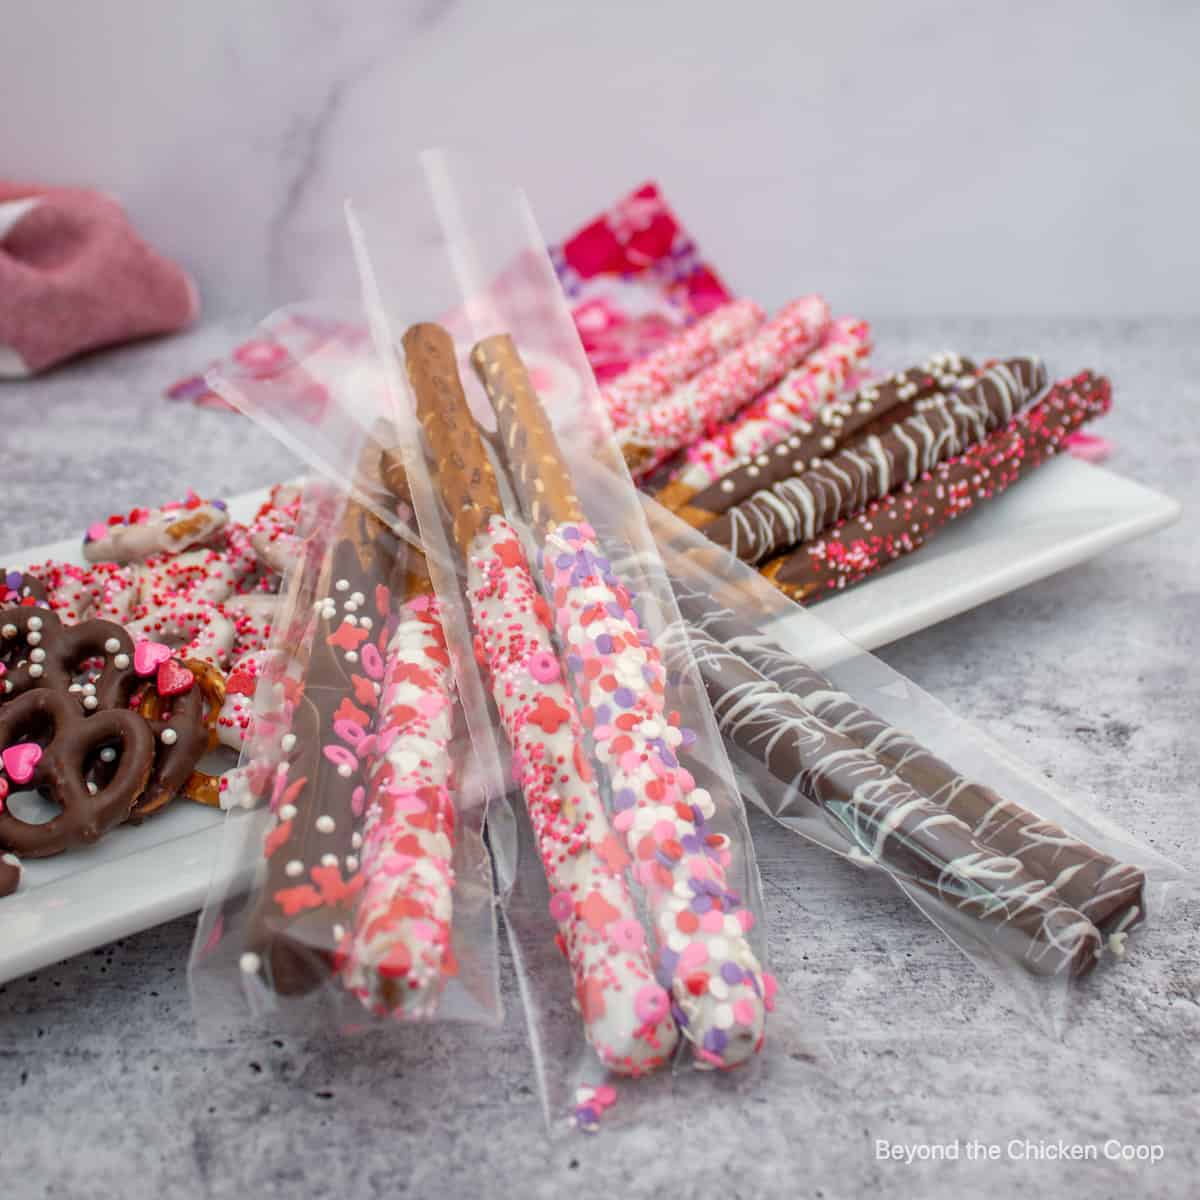 Chocolate dipped pretzels in a clear bag.